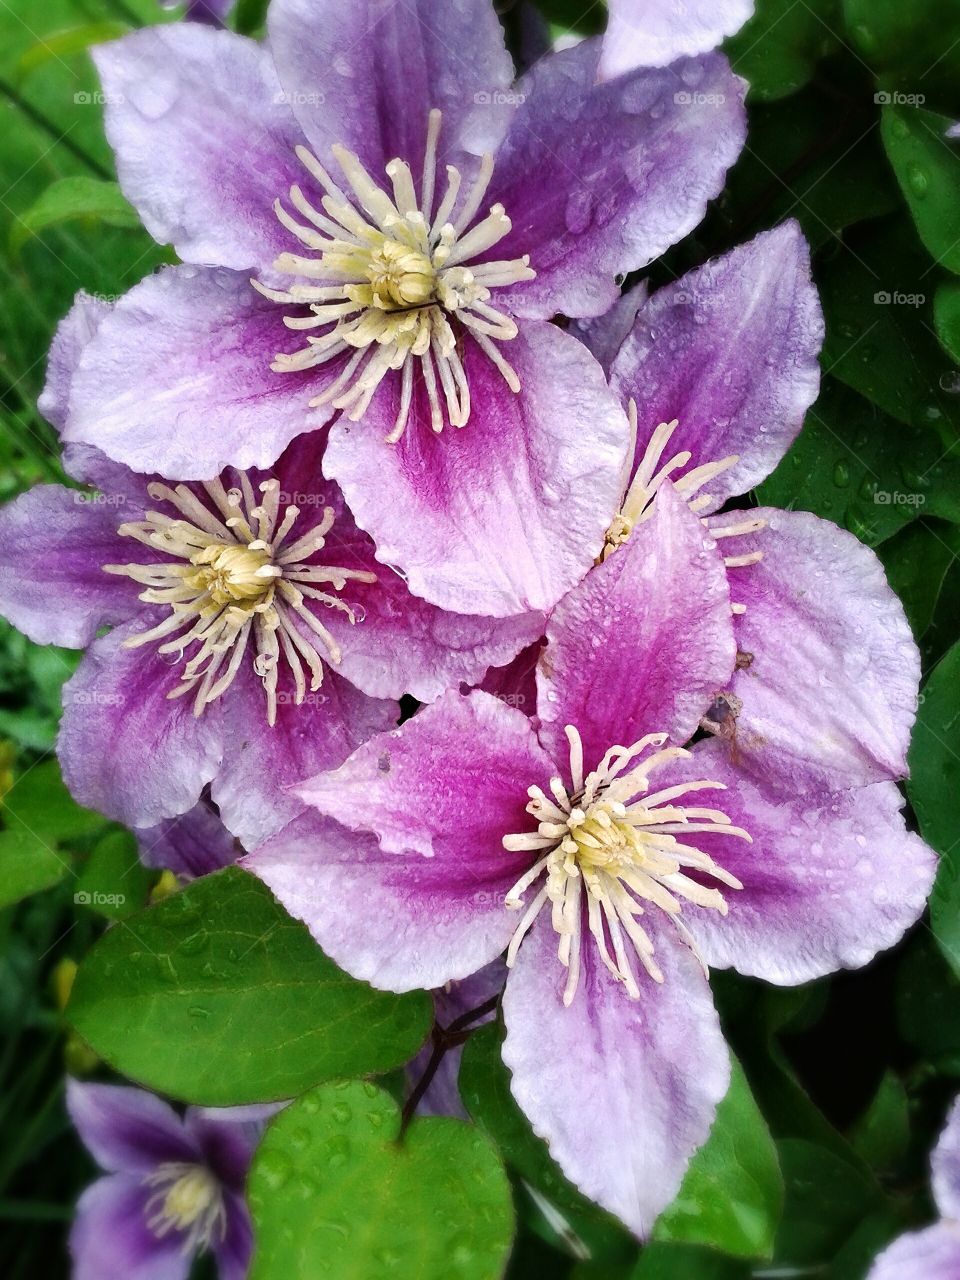 Clematis blooms after the rain..  Colorful Clematis blooms enjoying the much needed rain.